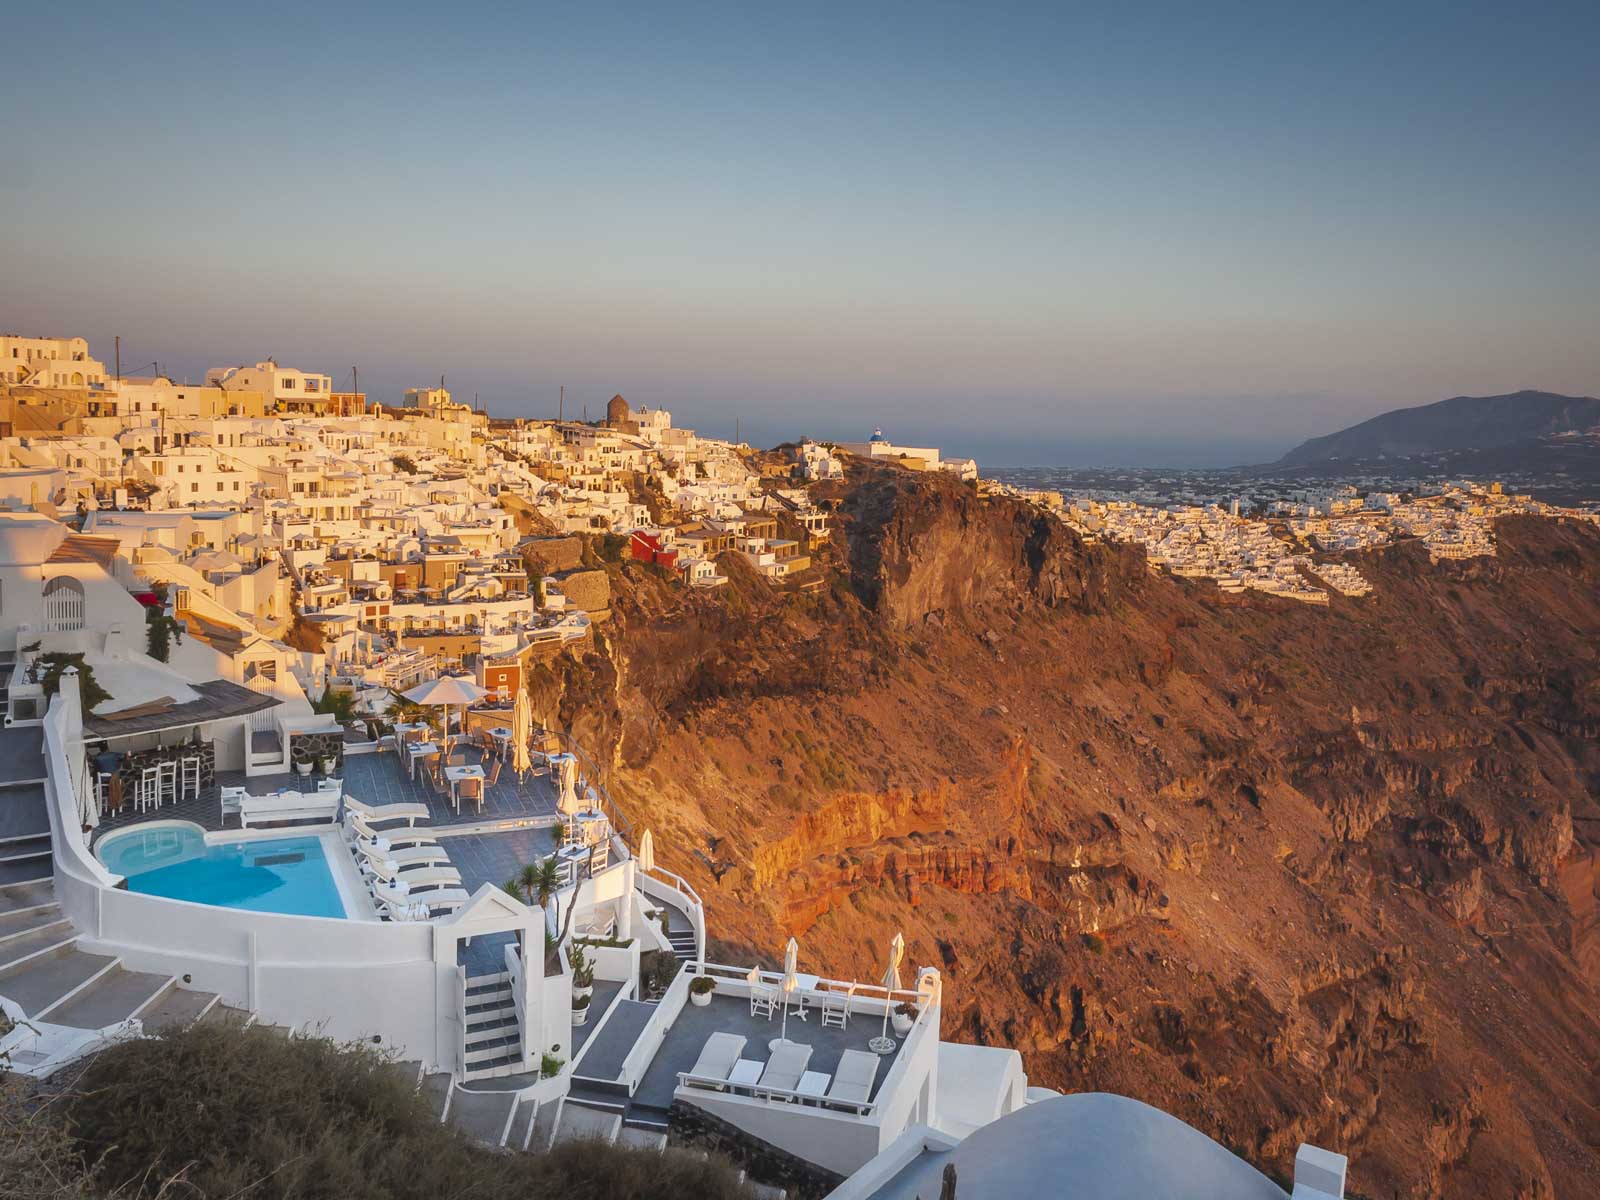 Where to stay in Santorini for your Honeymoon